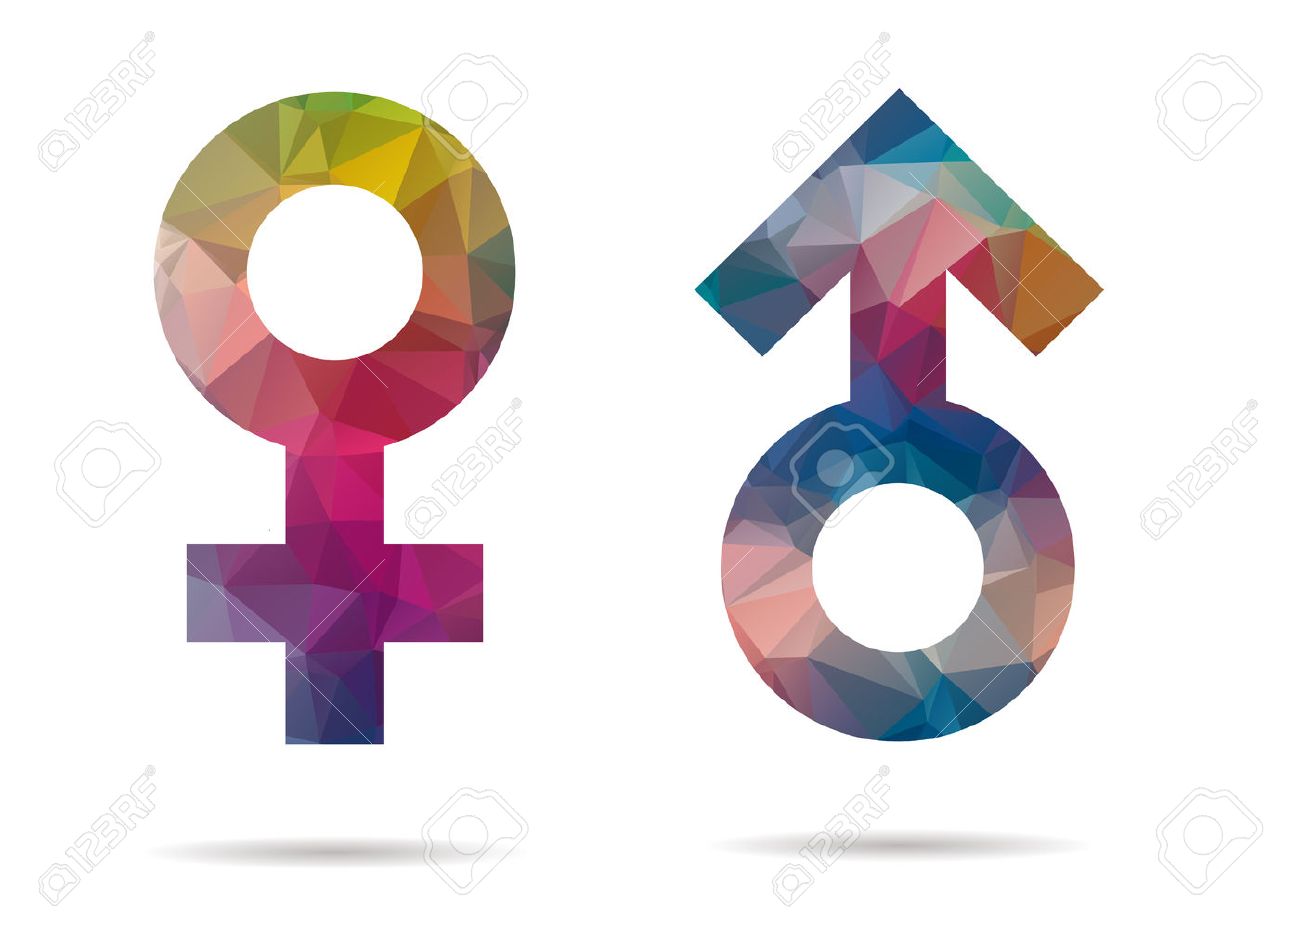 Free vector graphic: Female, Icon, Woman, Admin - Free Image on 